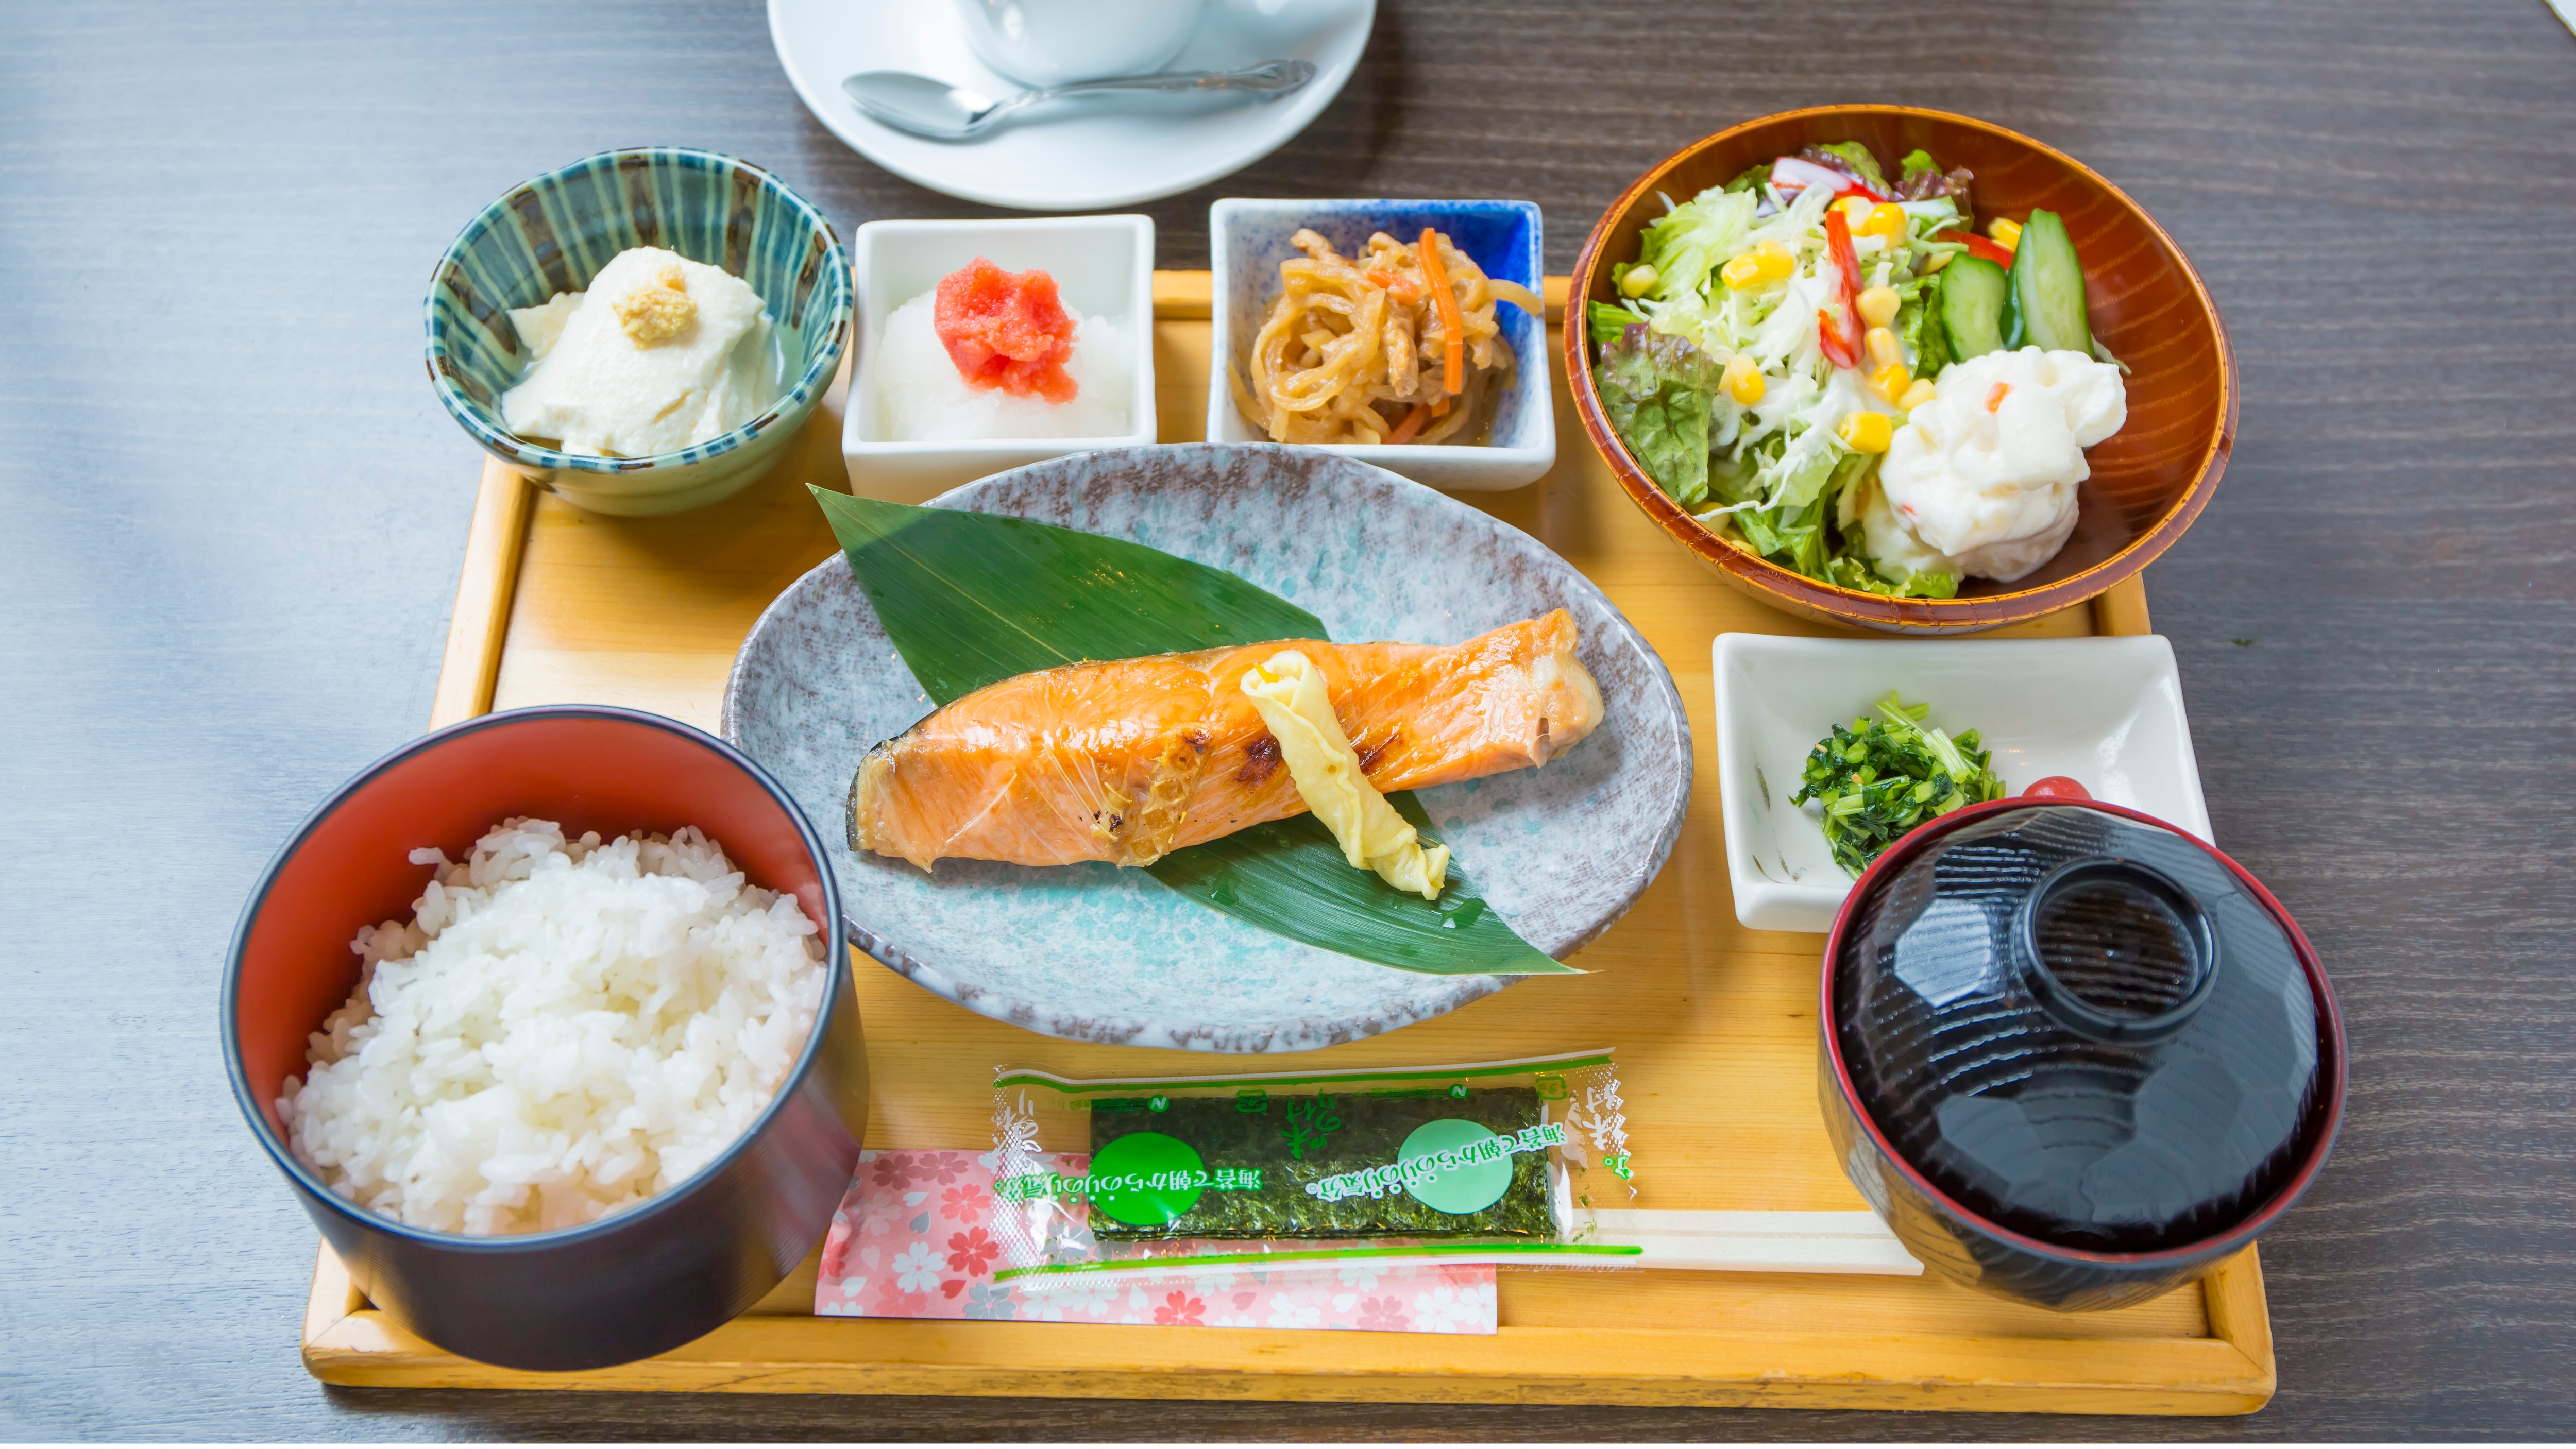 Breakfast "Japanese set meal" From 7 am to 10 am, you can have it at the restaurant "Nanao" for 970 yen.